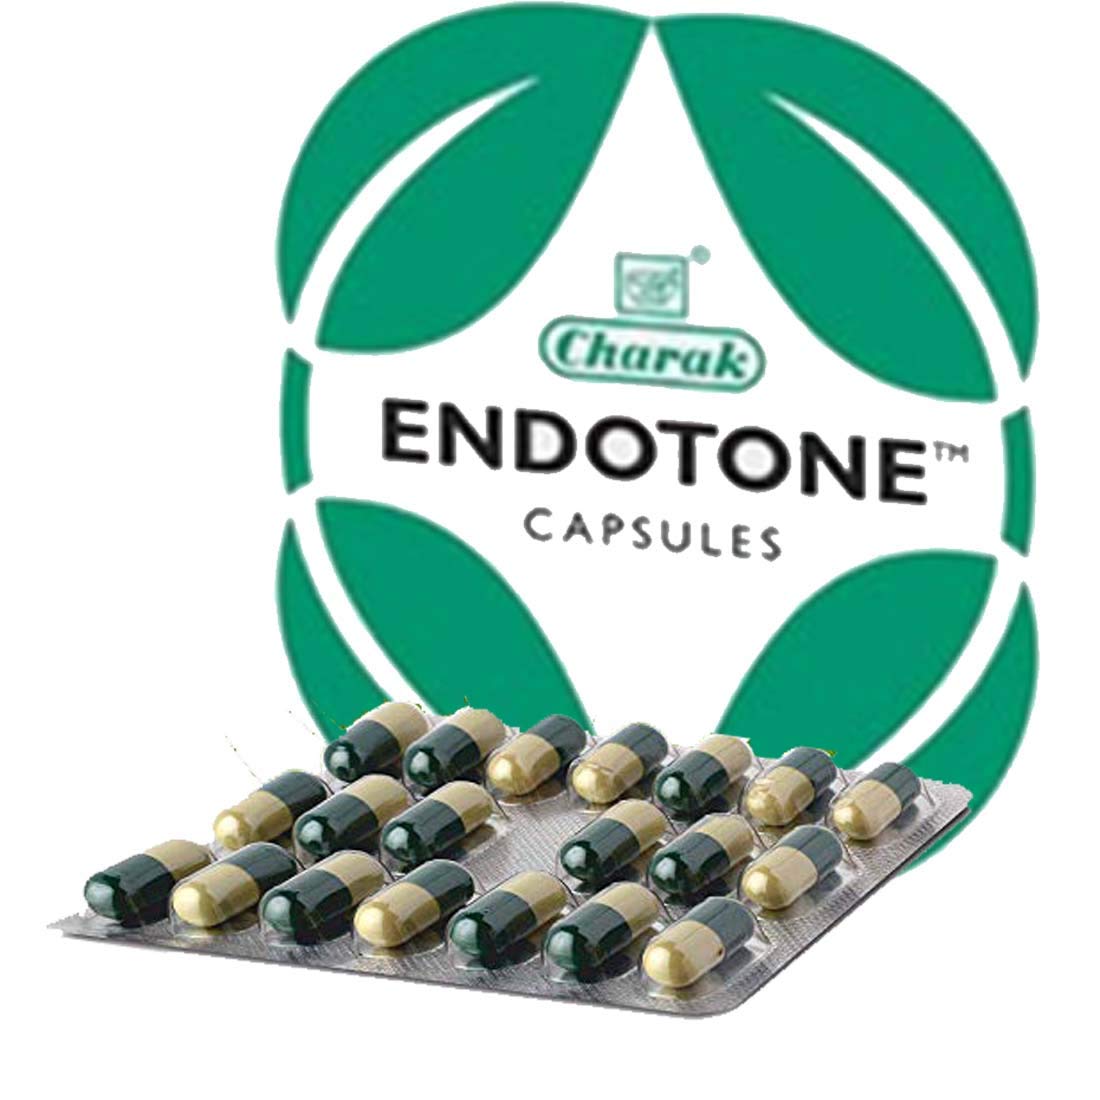 Shop Endotone Capsules - 20Capsules at price 165.00 from Charak Online - Ayush Care